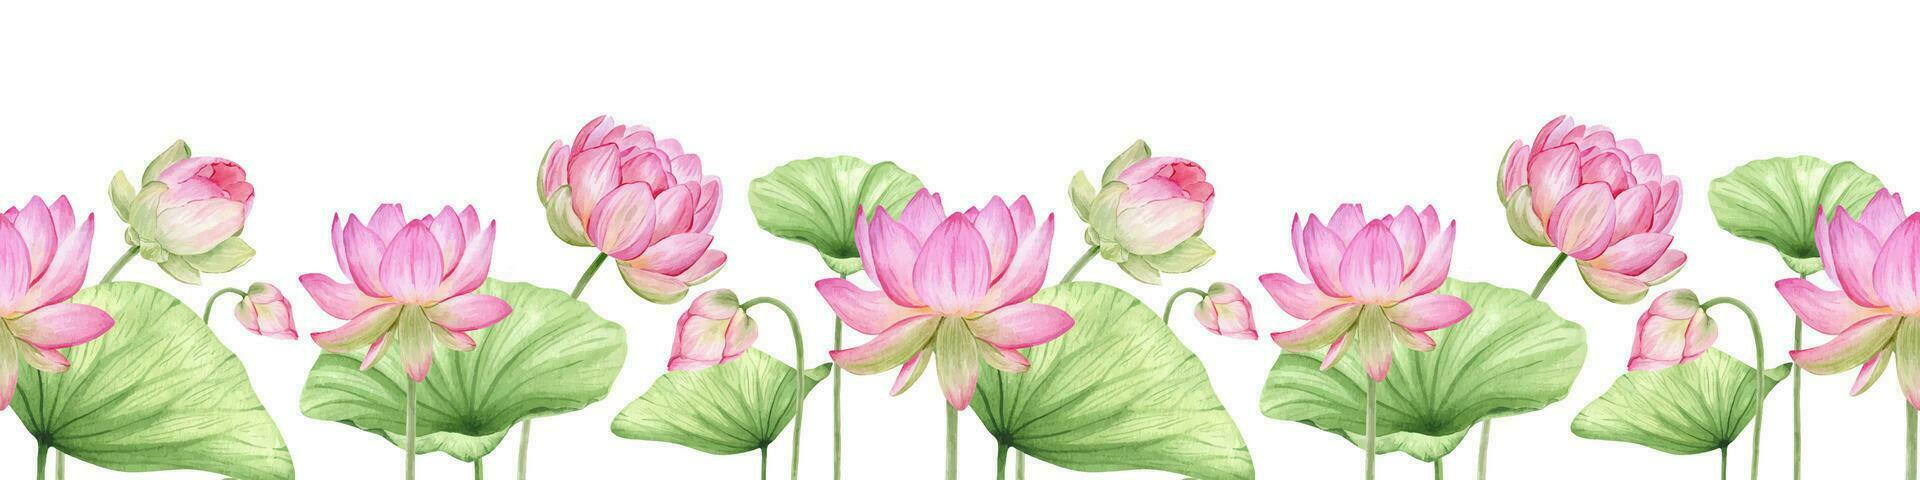 Pink lotus flowers and leaves. Watercolor seamless border. Tropical flora. Oriental traditional pattern. Isolated. For the design of goods, packaging, invitations. postcards vector